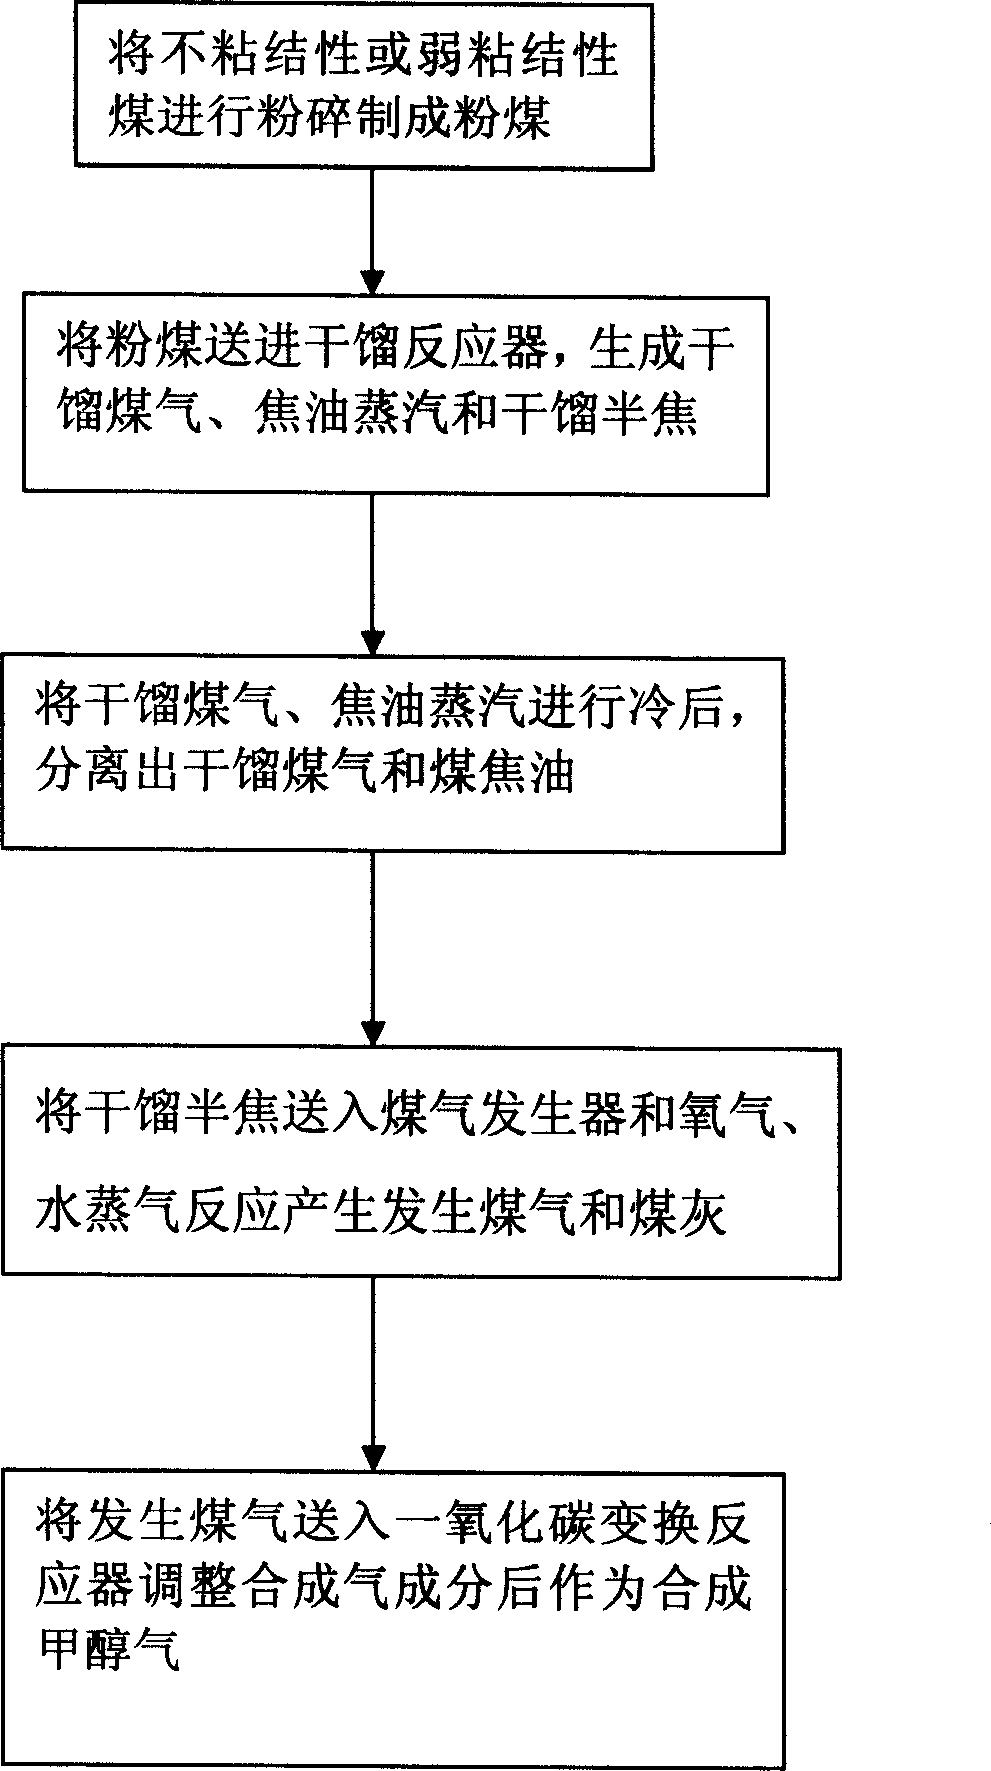 Technology of preparing synthetic gas using non agglomerating or weak agglomerating coal fluidized destructive distillation